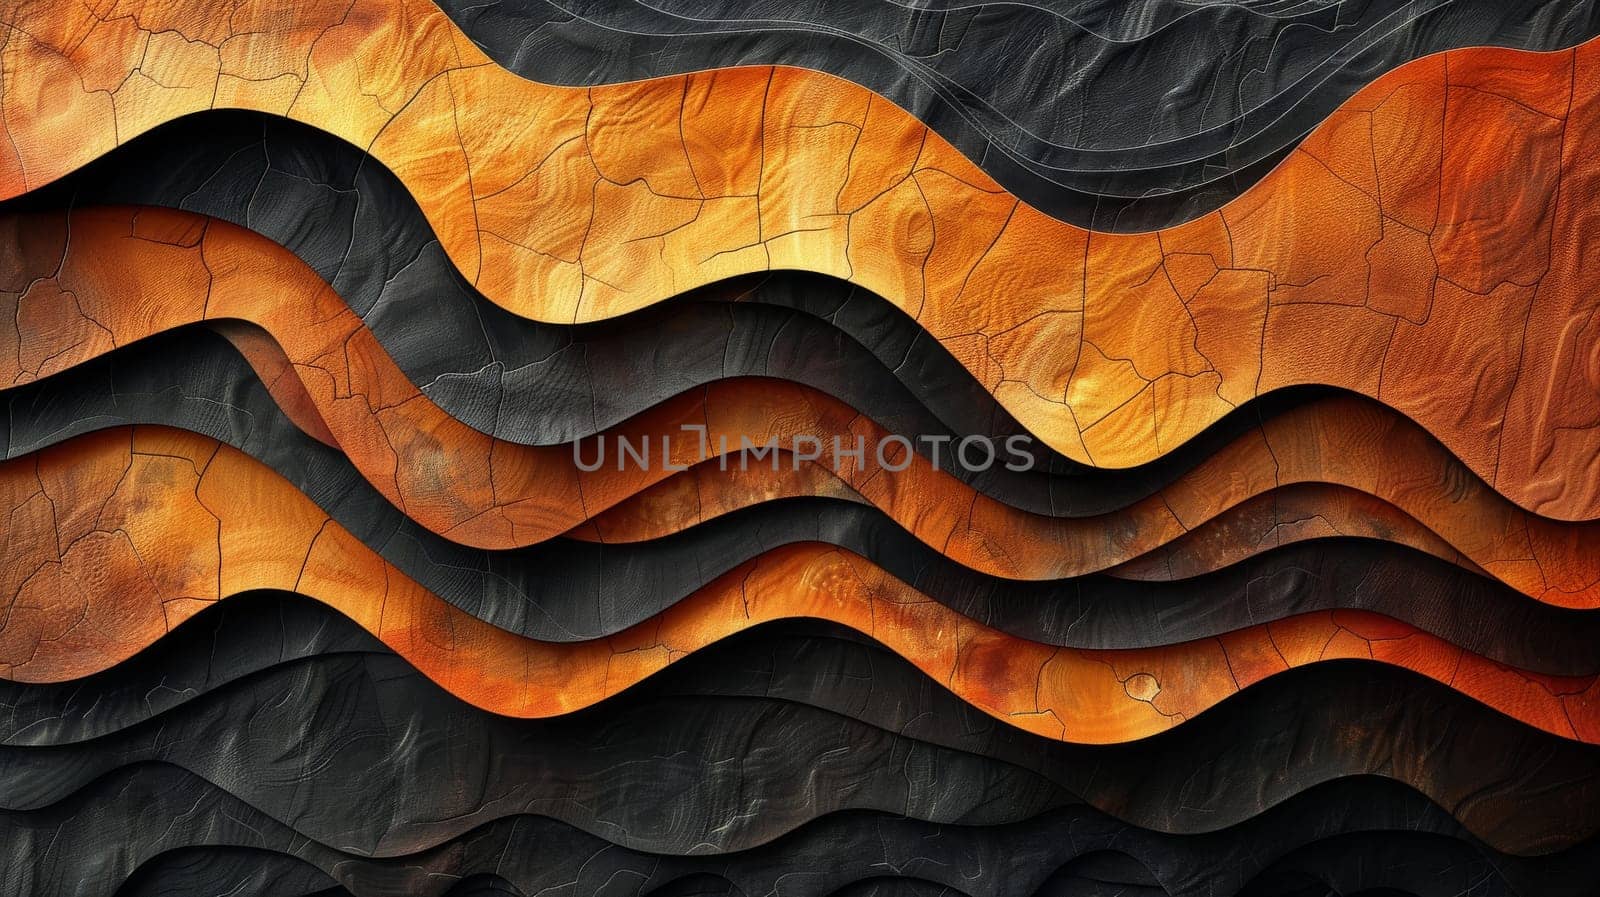 A series of orange and black waves with a fiery orange background. The waves are made of a material that looks like it's made of sand or some kind of textured paint. Scene is intense and dramatic